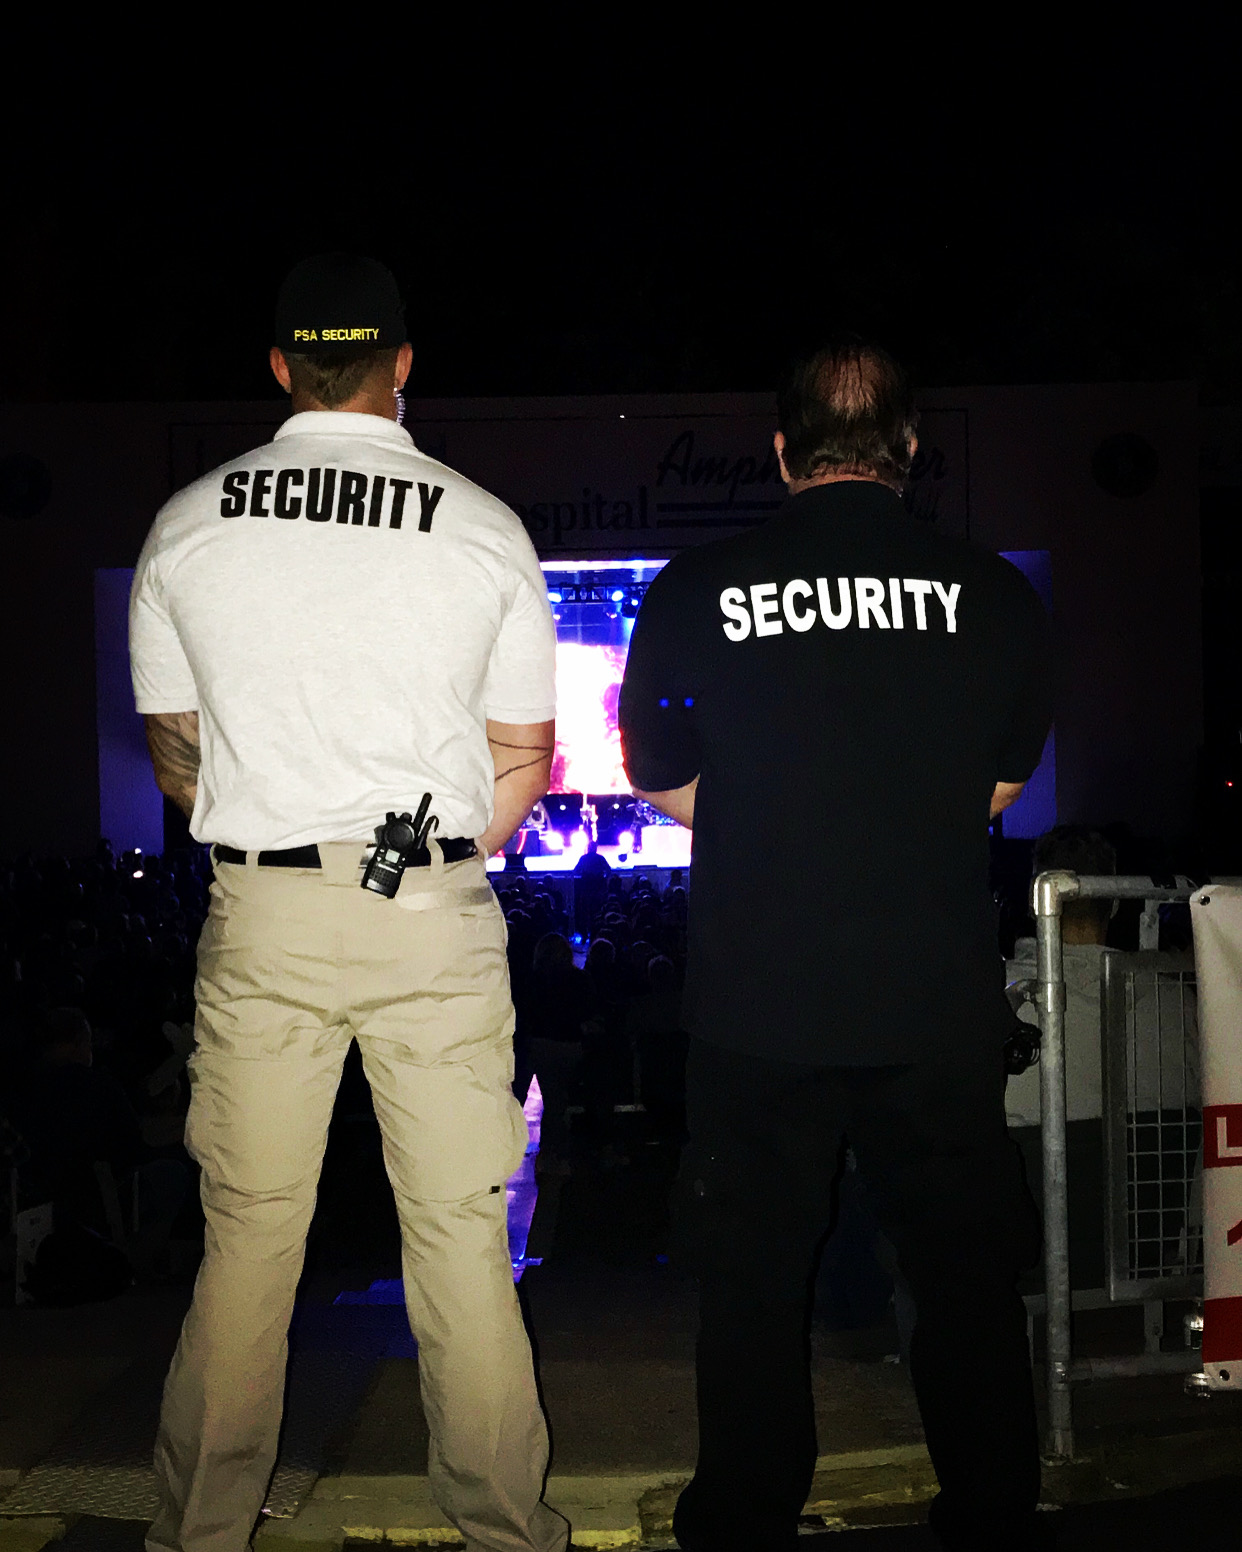 Nightlife Security Specialists - PSA Security & Consulting